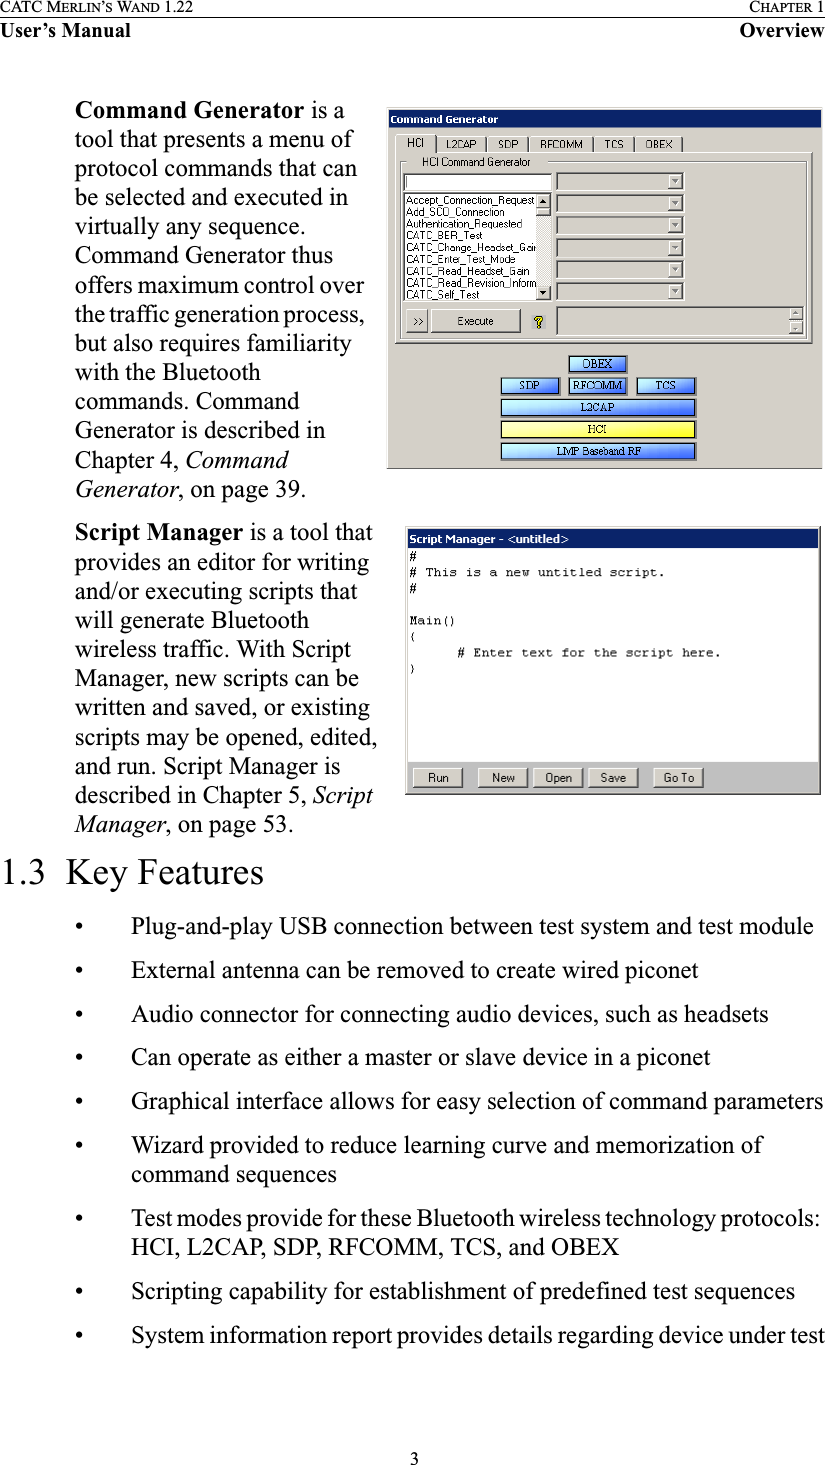  3CATC MERLIN’S WAND 1.22 CHAPTER 1User’s Manual OverviewCommand Generator is a tool that presents a menu of protocol commands that can be selected and executed in virtually any sequence. Command Generator thus offers maximum control over the traffic generation process, but also requires familiarity with the Bluetooth commands. Command Generator is described in Chapter 4, Command Generator, on page 39.Script Manager is a tool that provides an editor for writing and/or executing scripts that will generate Bluetooth wireless traffic. With Script Manager, new scripts can be written and saved, or existing scripts may be opened, edited, and run. Script Manager is described in Chapter 5, Script Manager, on page 53.1.3  Key Features• Plug-and-play USB connection between test system and test module• External antenna can be removed to create wired piconet• Audio connector for connecting audio devices, such as headsets• Can operate as either a master or slave device in a piconet• Graphical interface allows for easy selection of command parameters• Wizard provided to reduce learning curve and memorization of command sequences• Test modes provide for these Bluetooth wireless technology protocols: HCI, L2CAP, SDP, RFCOMM, TCS, and OBEX• Scripting capability for establishment of predefined test sequences• System information report provides details regarding device under test